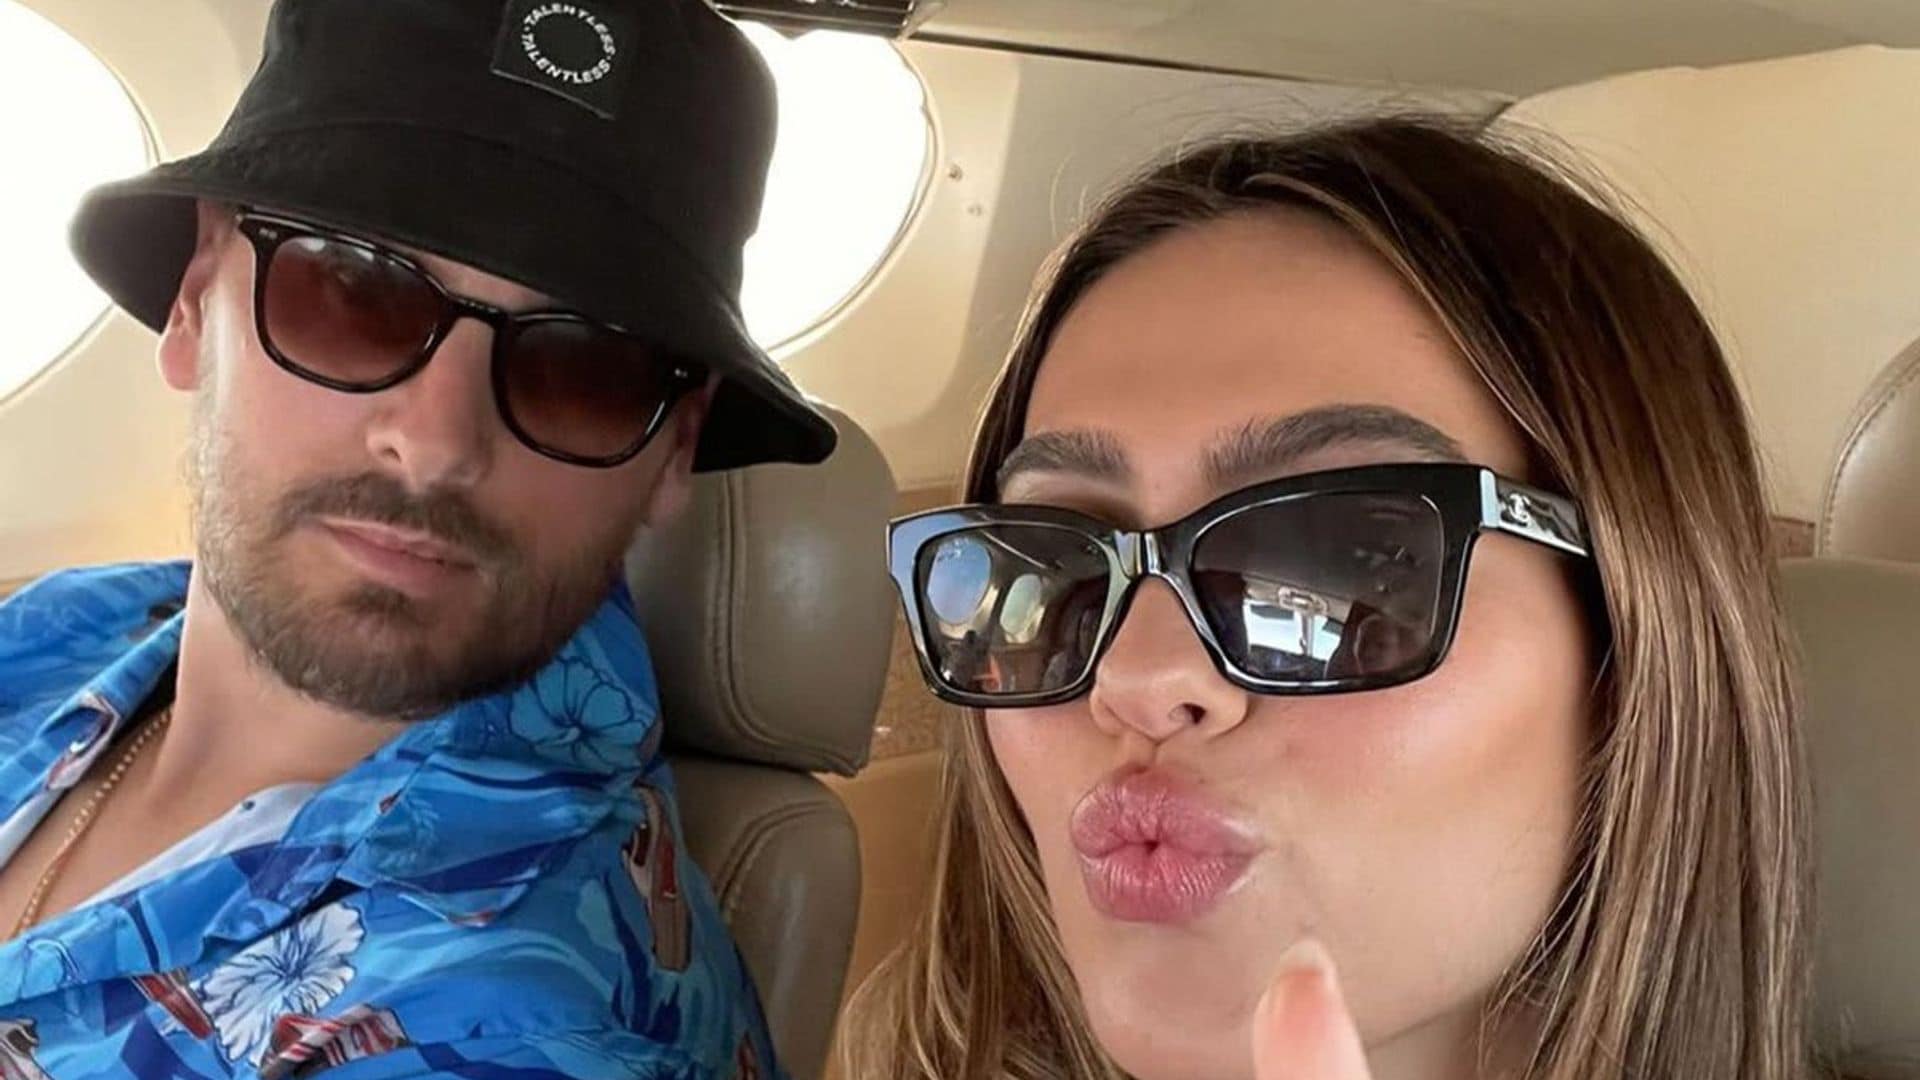 Scott Disick and Amelia Hamlin call it quits after 11 months together